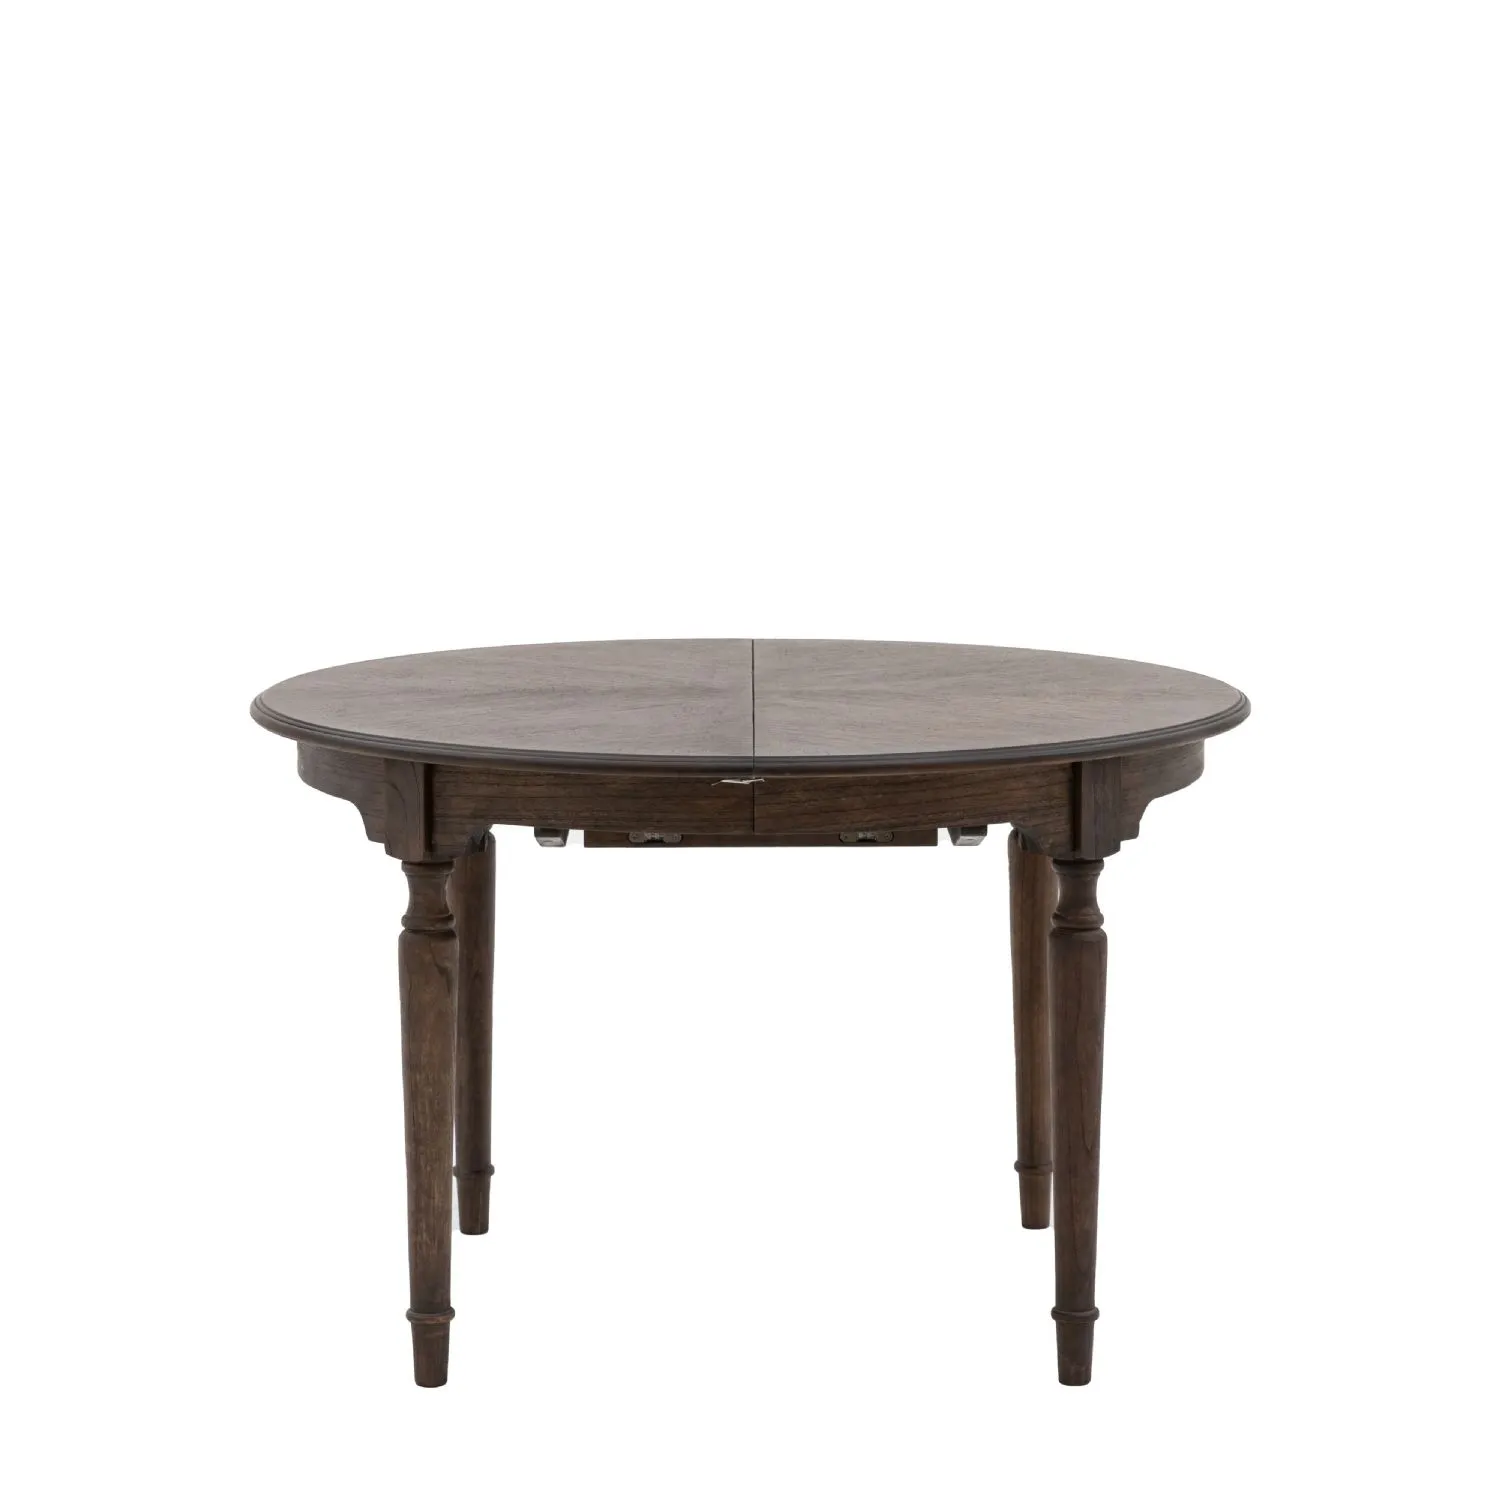 Dark Wood Extending Round Dining Table with Spindle Legs